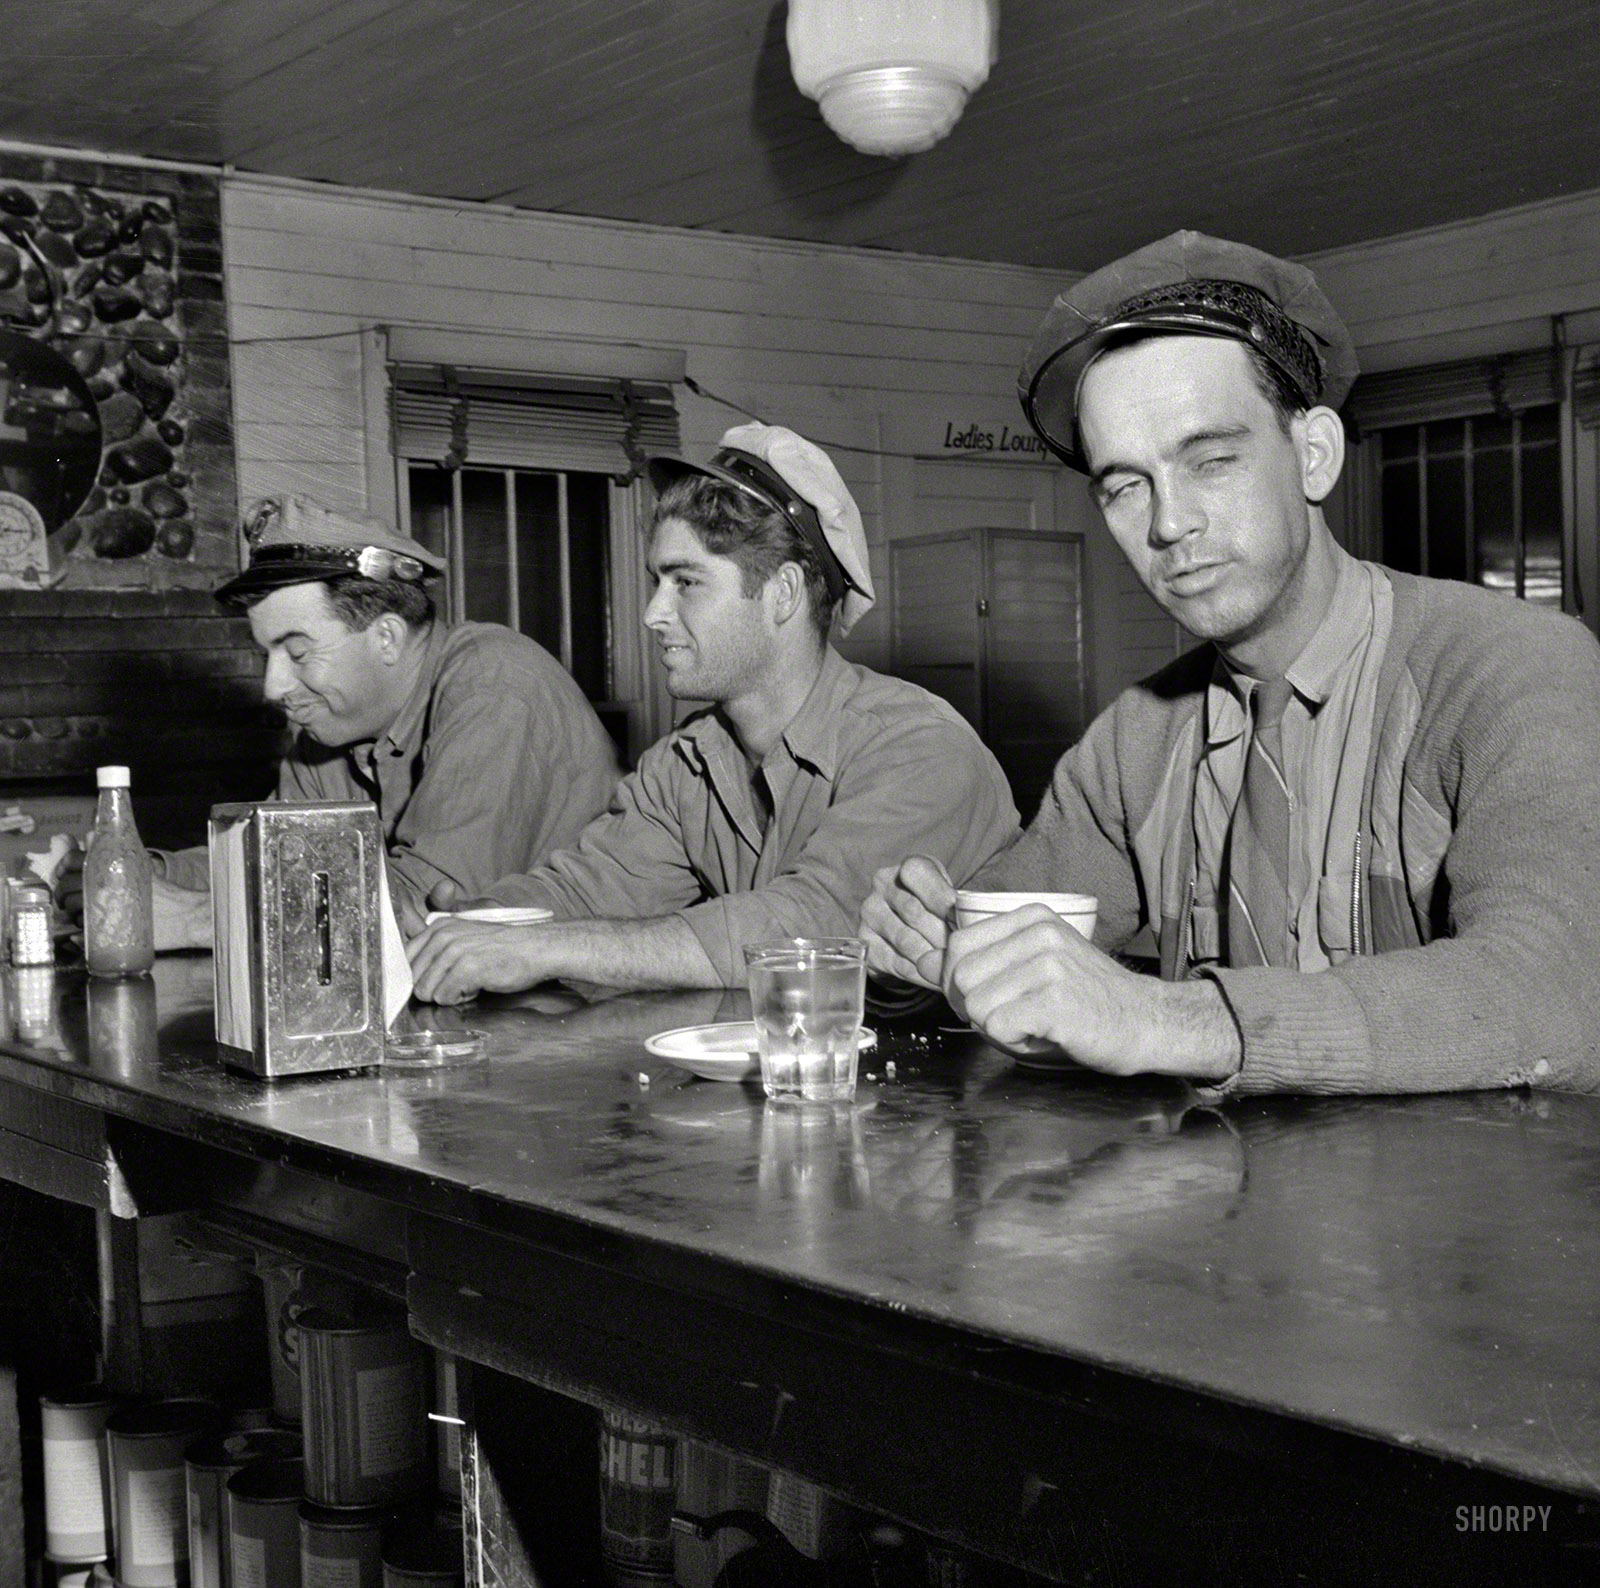 March 1943. "Pearlington, Mississippi (vicinity). Truck drivers at a highway coffee stop on U.S. Highway 90." Who's up for a slice of apple pie? Medium format negative by John Vachon, Office of War Information. View full size.